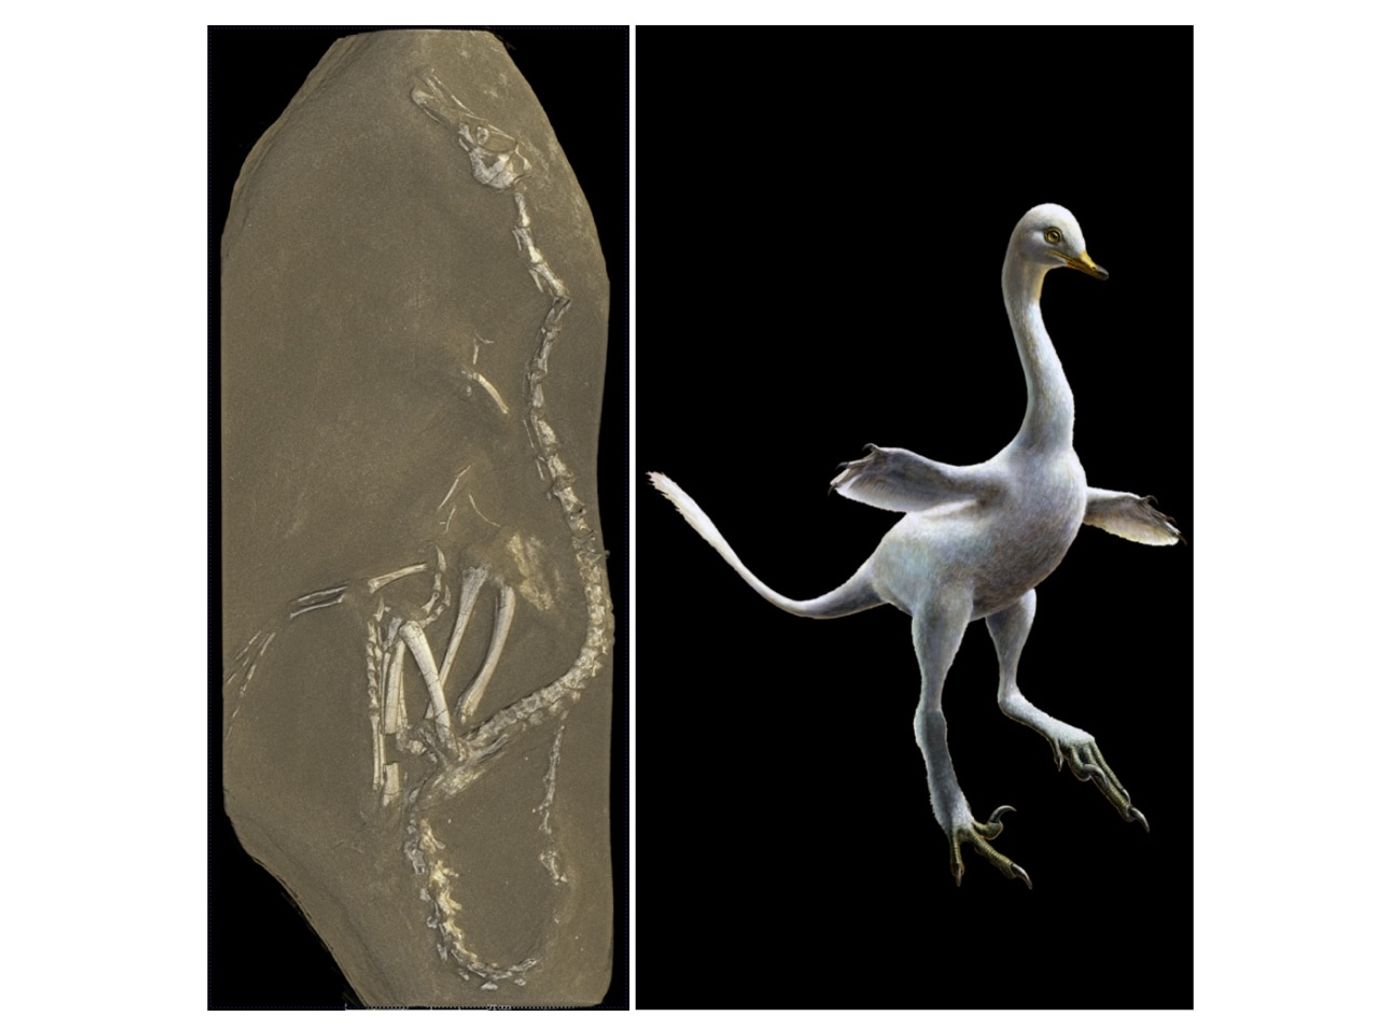 An image of the fossil beside an artist's rendition of what the creature might have looked like.